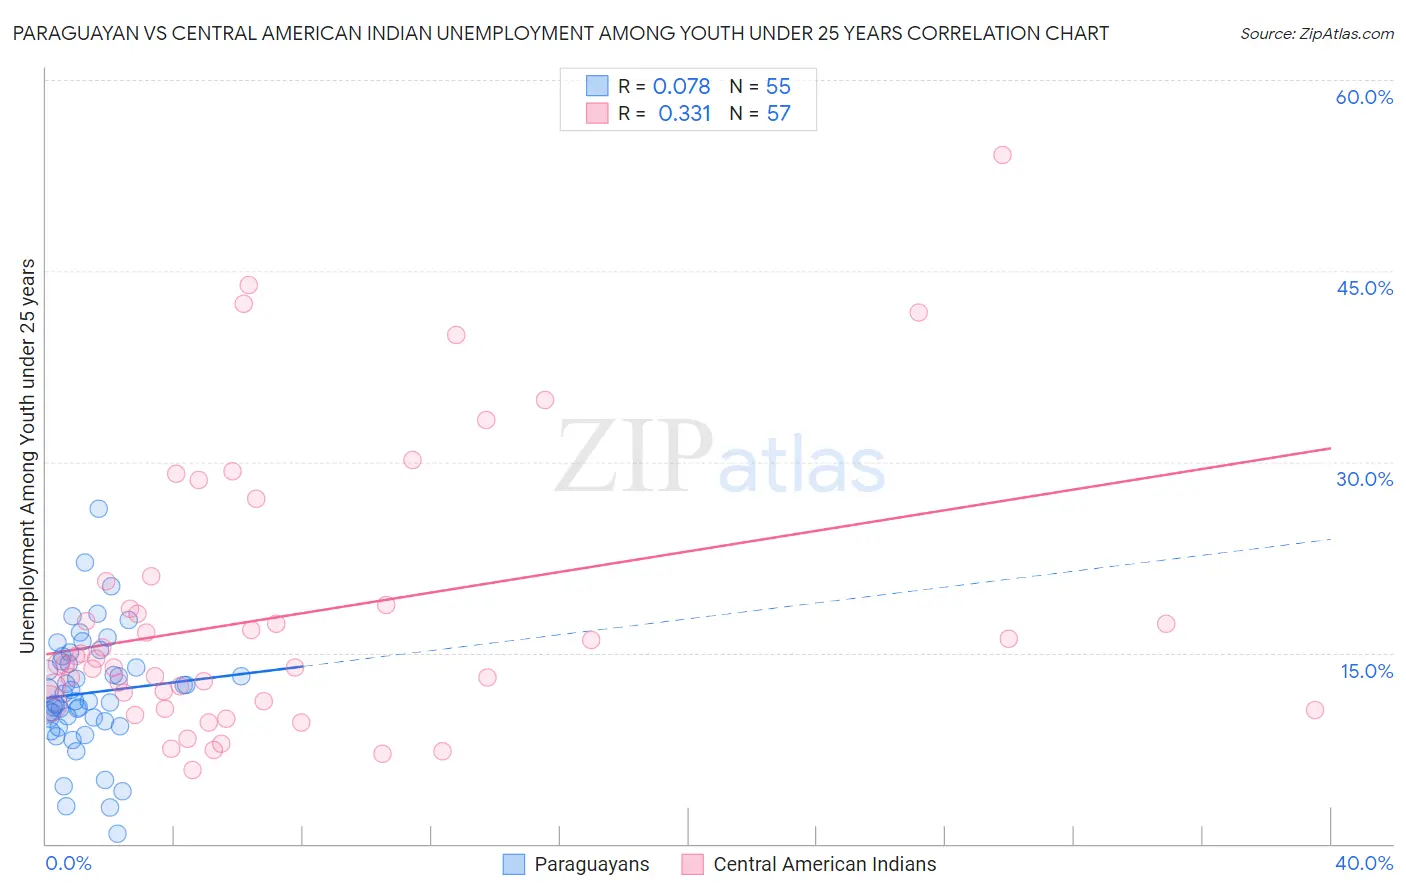 Paraguayan vs Central American Indian Unemployment Among Youth under 25 years